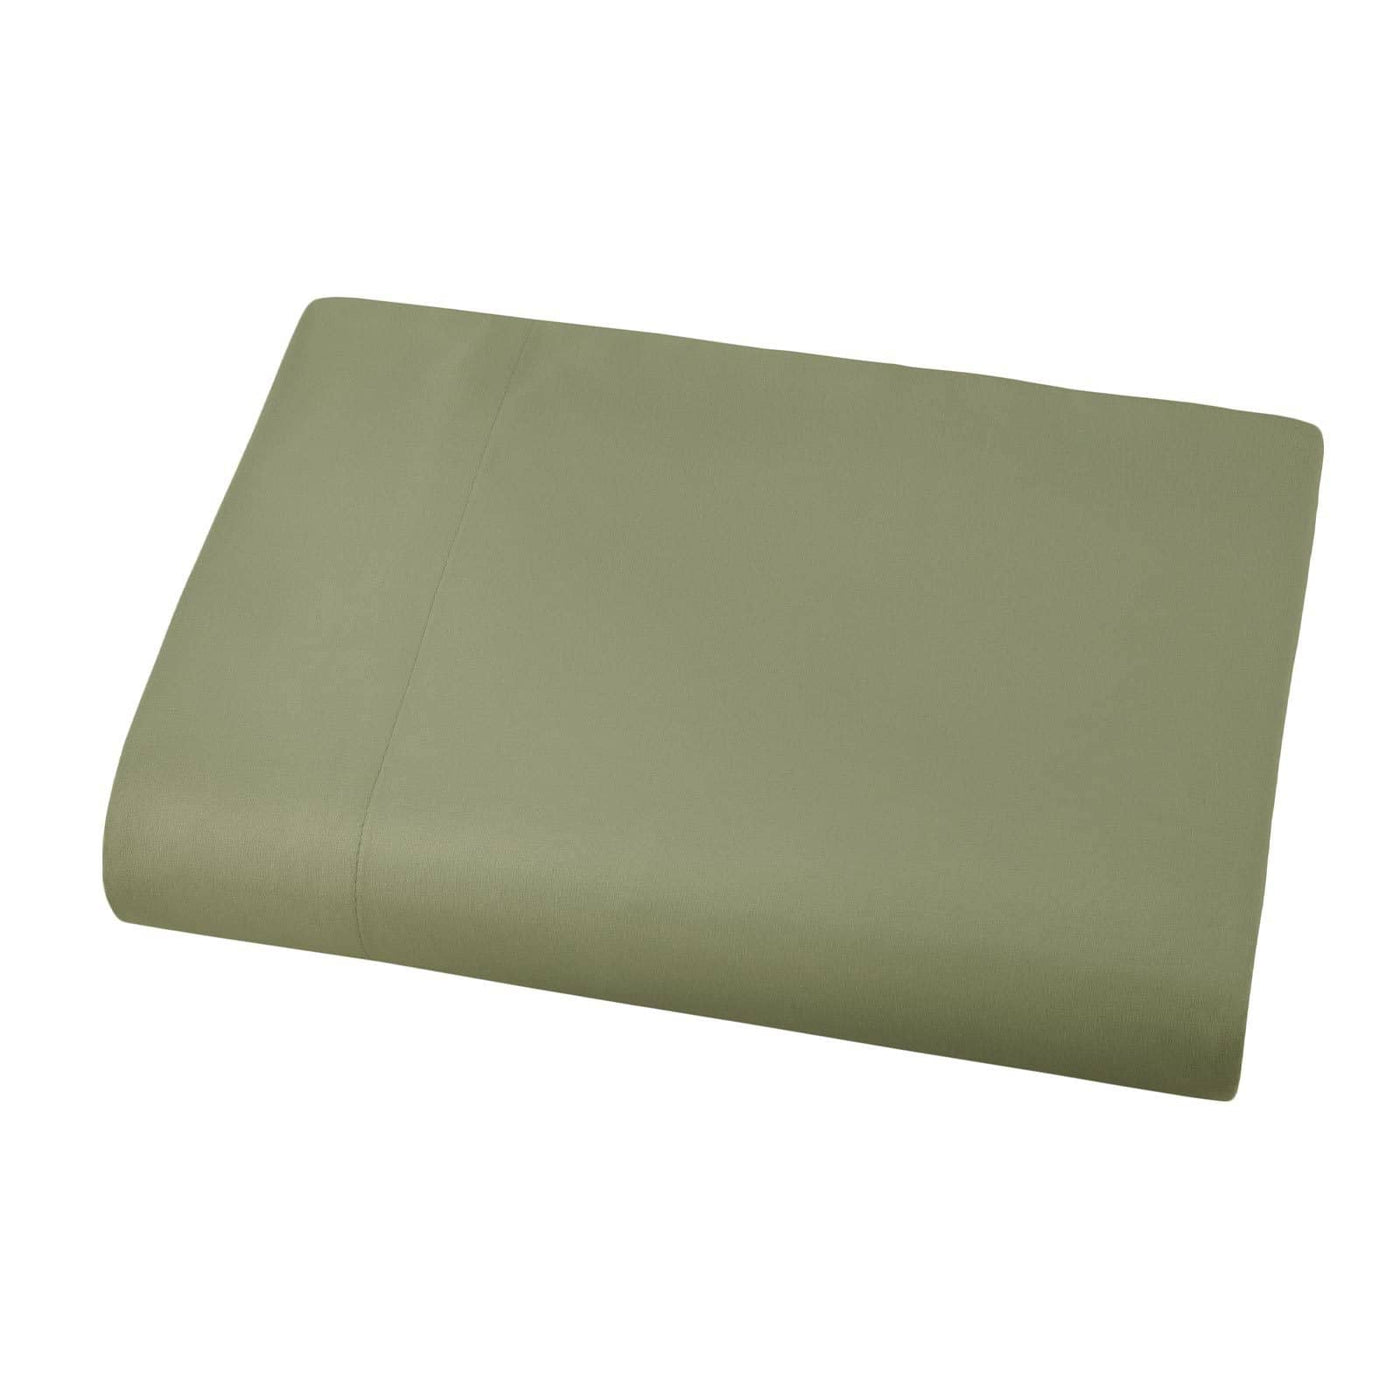 Soft and Luxurious Over-sized Flat Sheet 132 in x 110 in by Vilano springs in Sage Green#color_vilano-sage-green